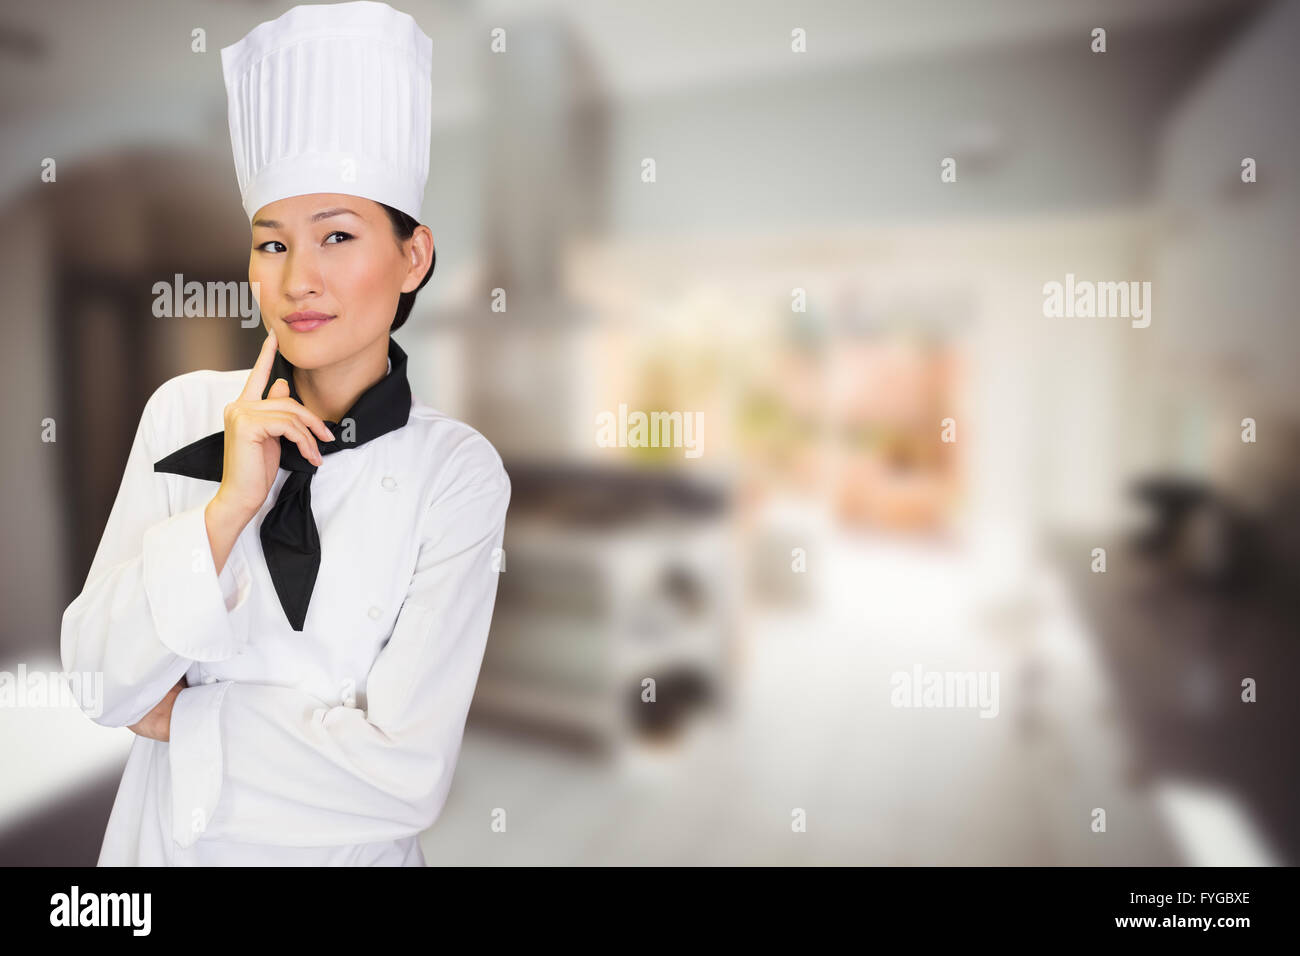 Composite image of portrait of thoughtful female cook in kitchen Stock Photo